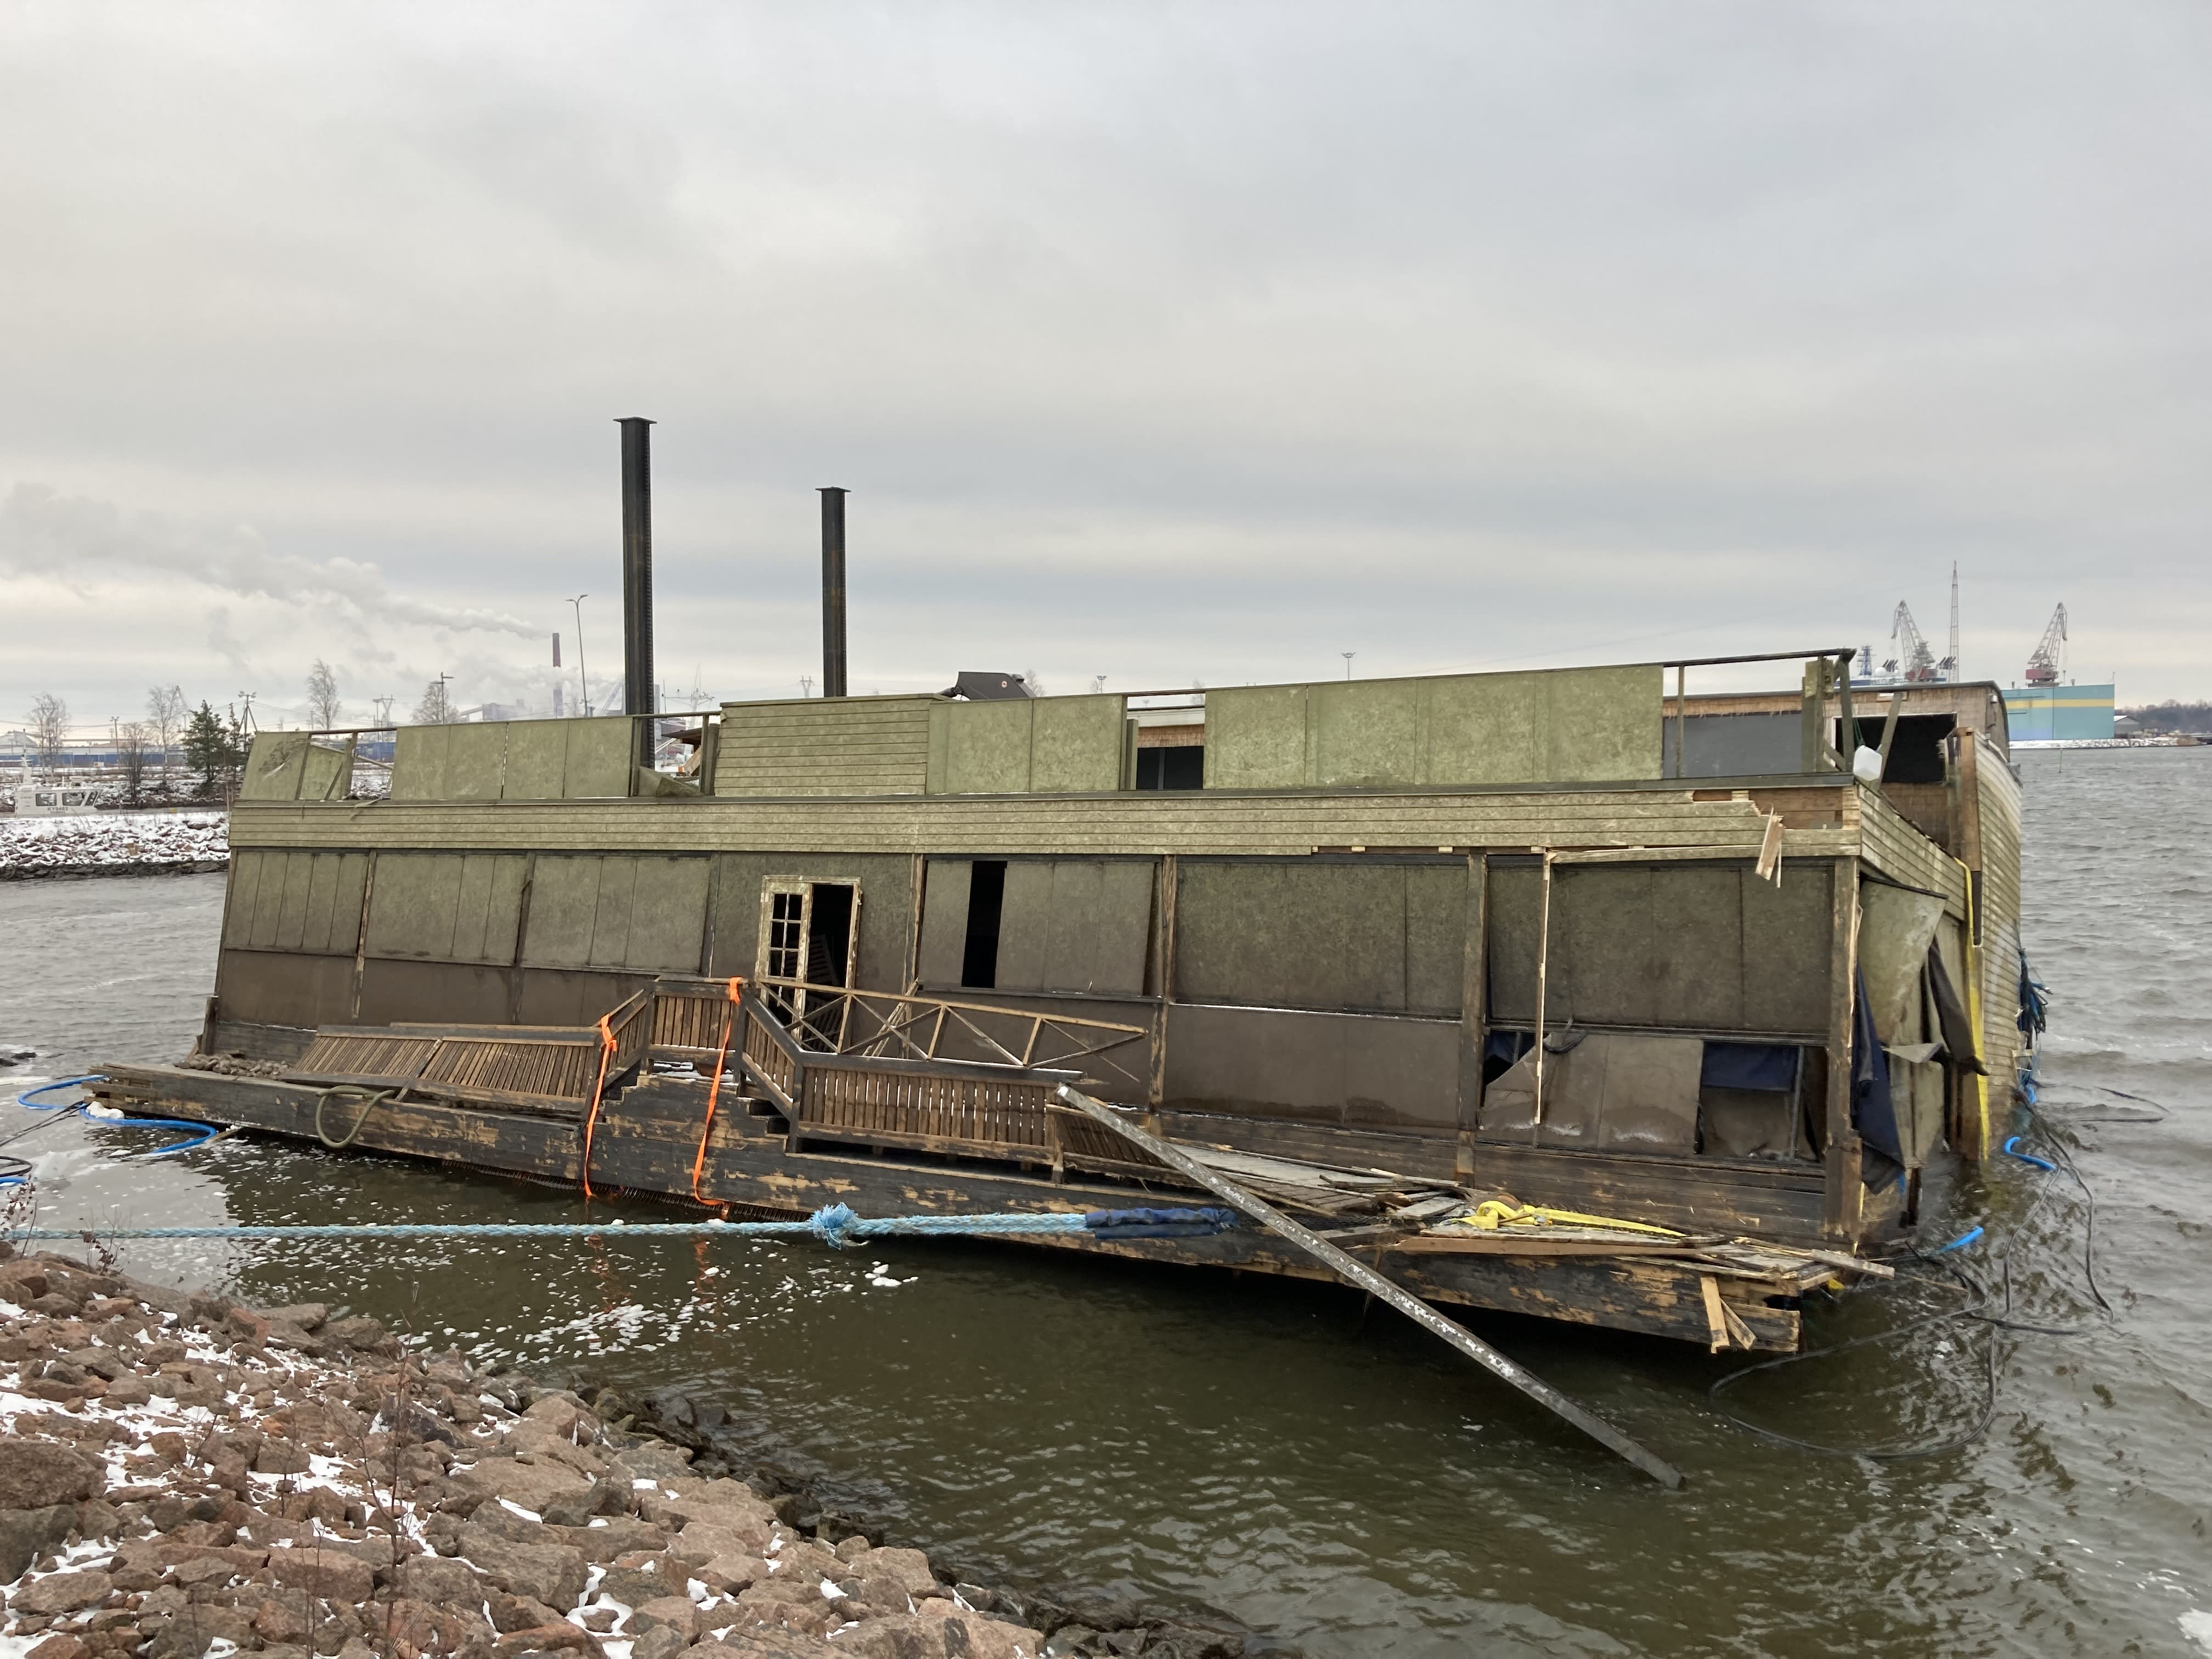 A Finnish city pays 177,000 euros to get a sunken boat bar out of the harbor